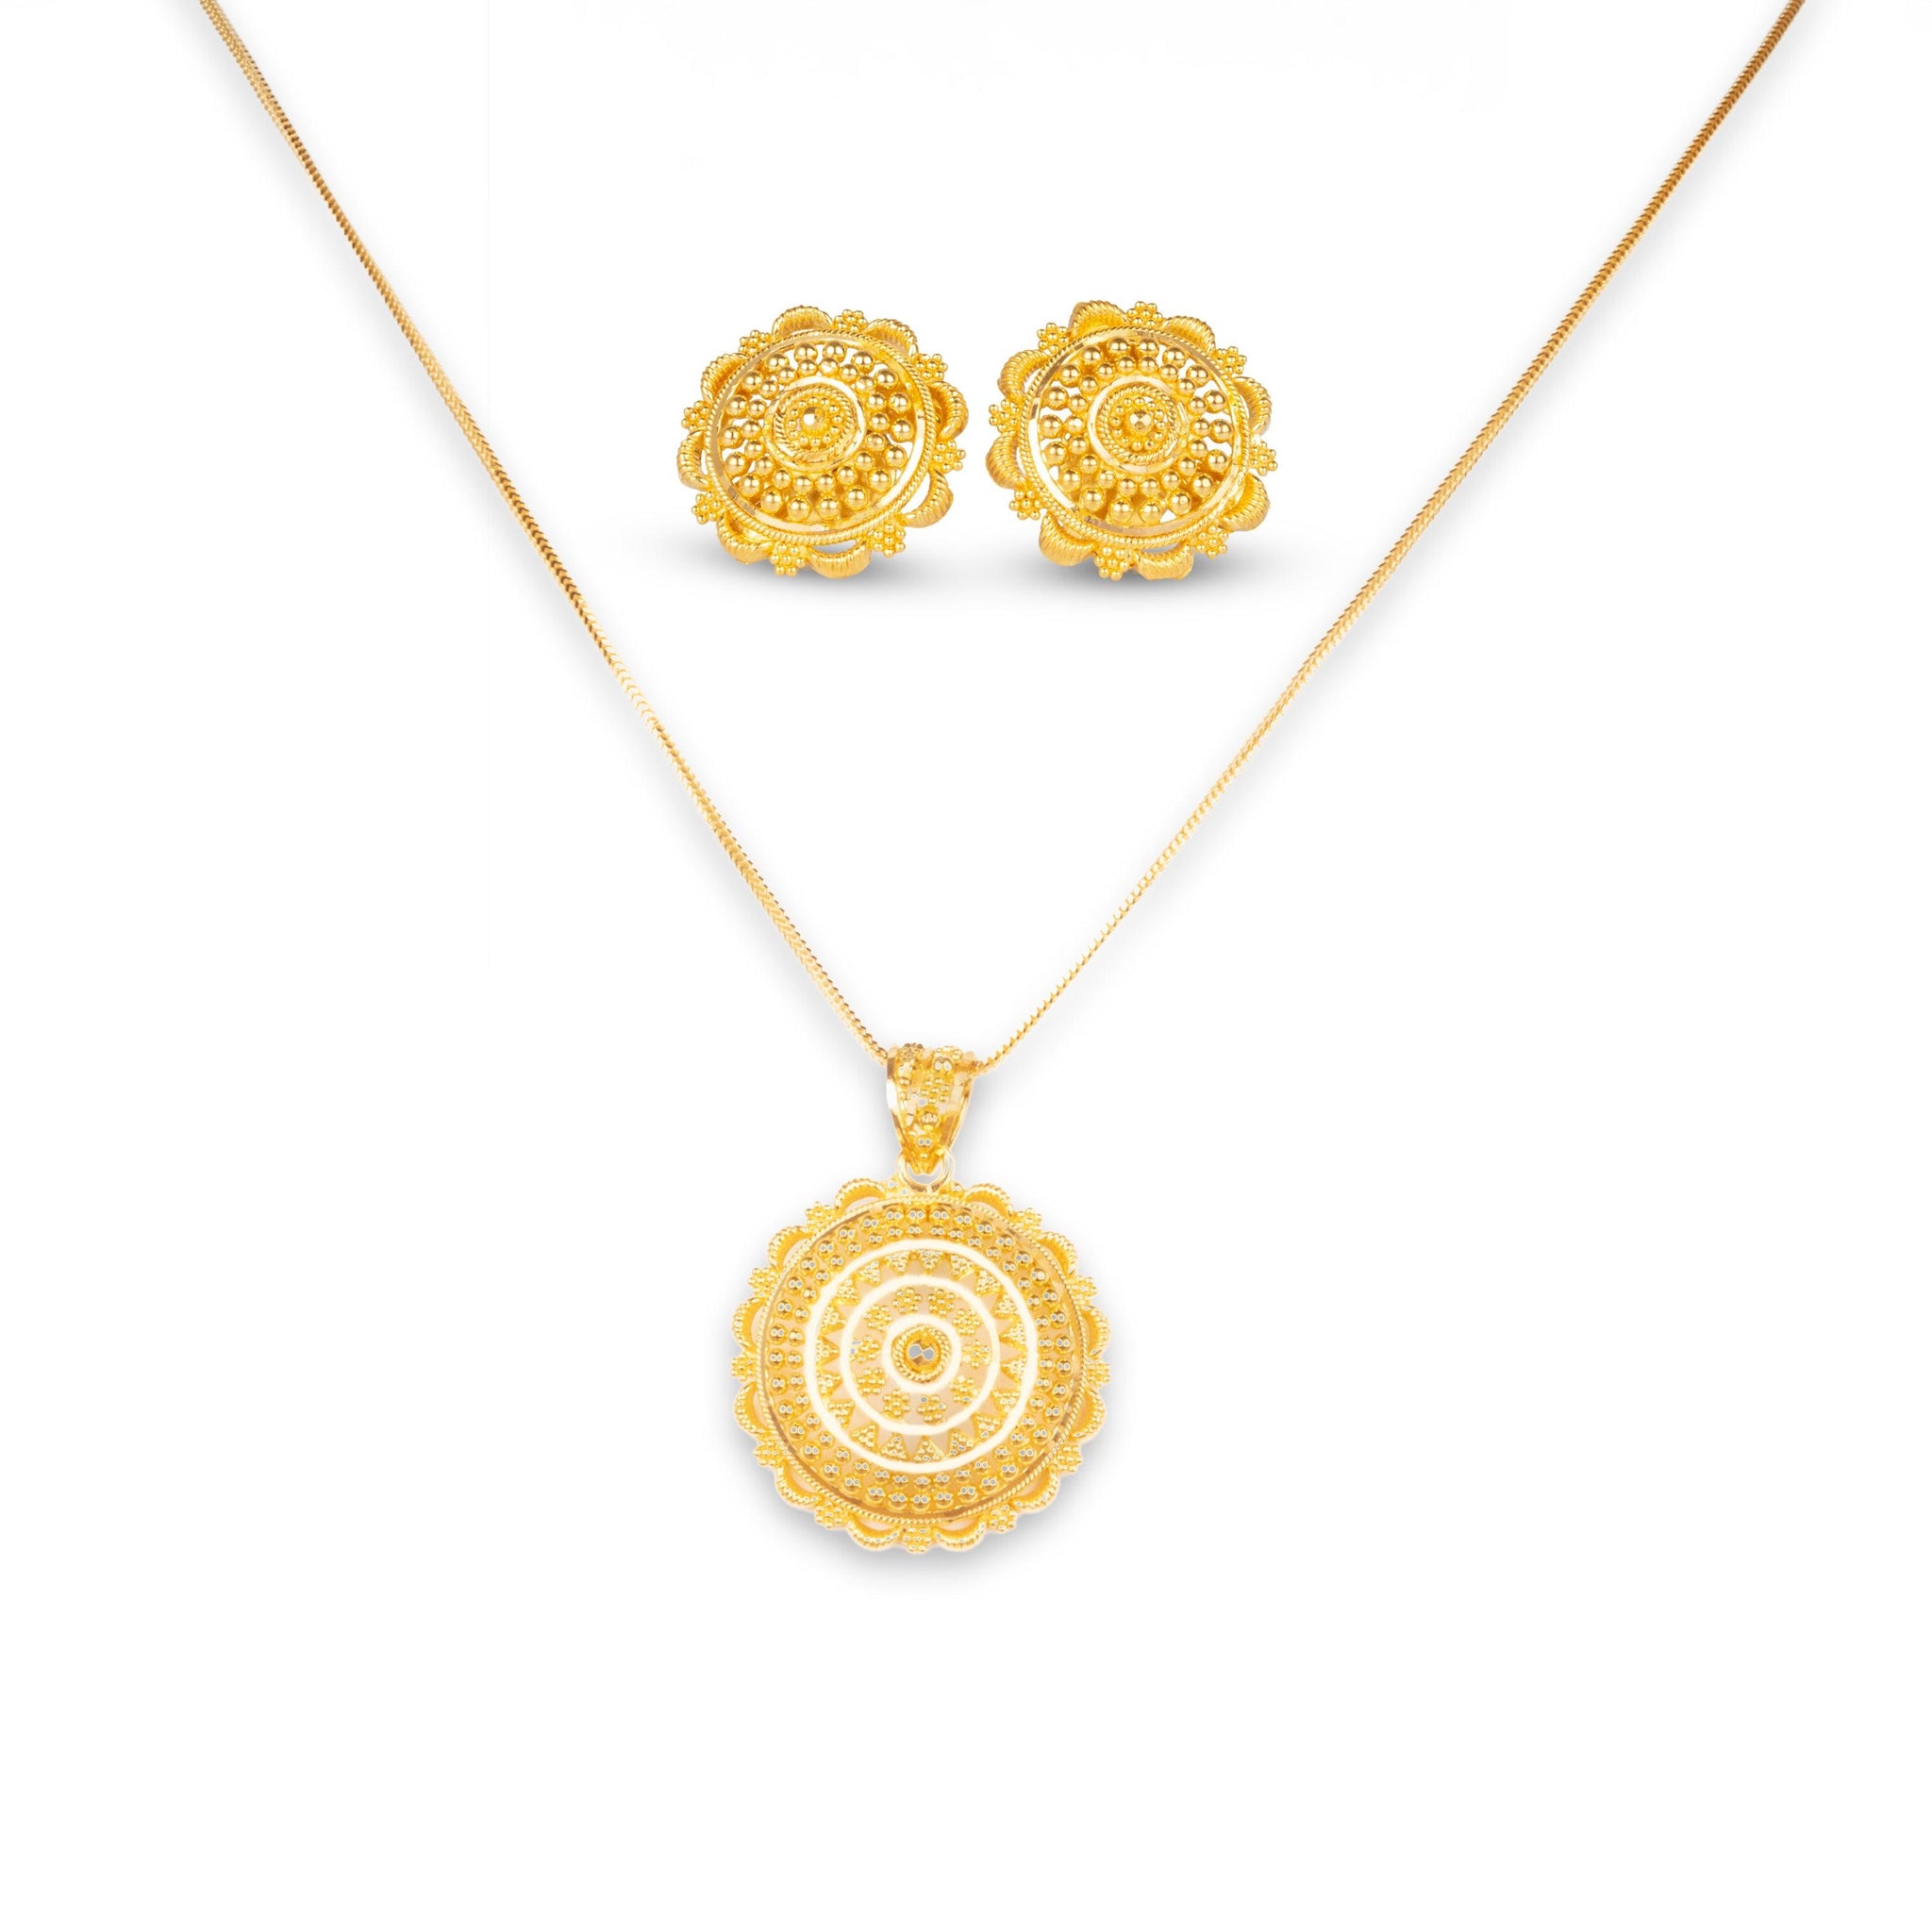 22ct Gold Set with Filigree Work (Pendant + Chain + Stud Earrings) (13.5g)